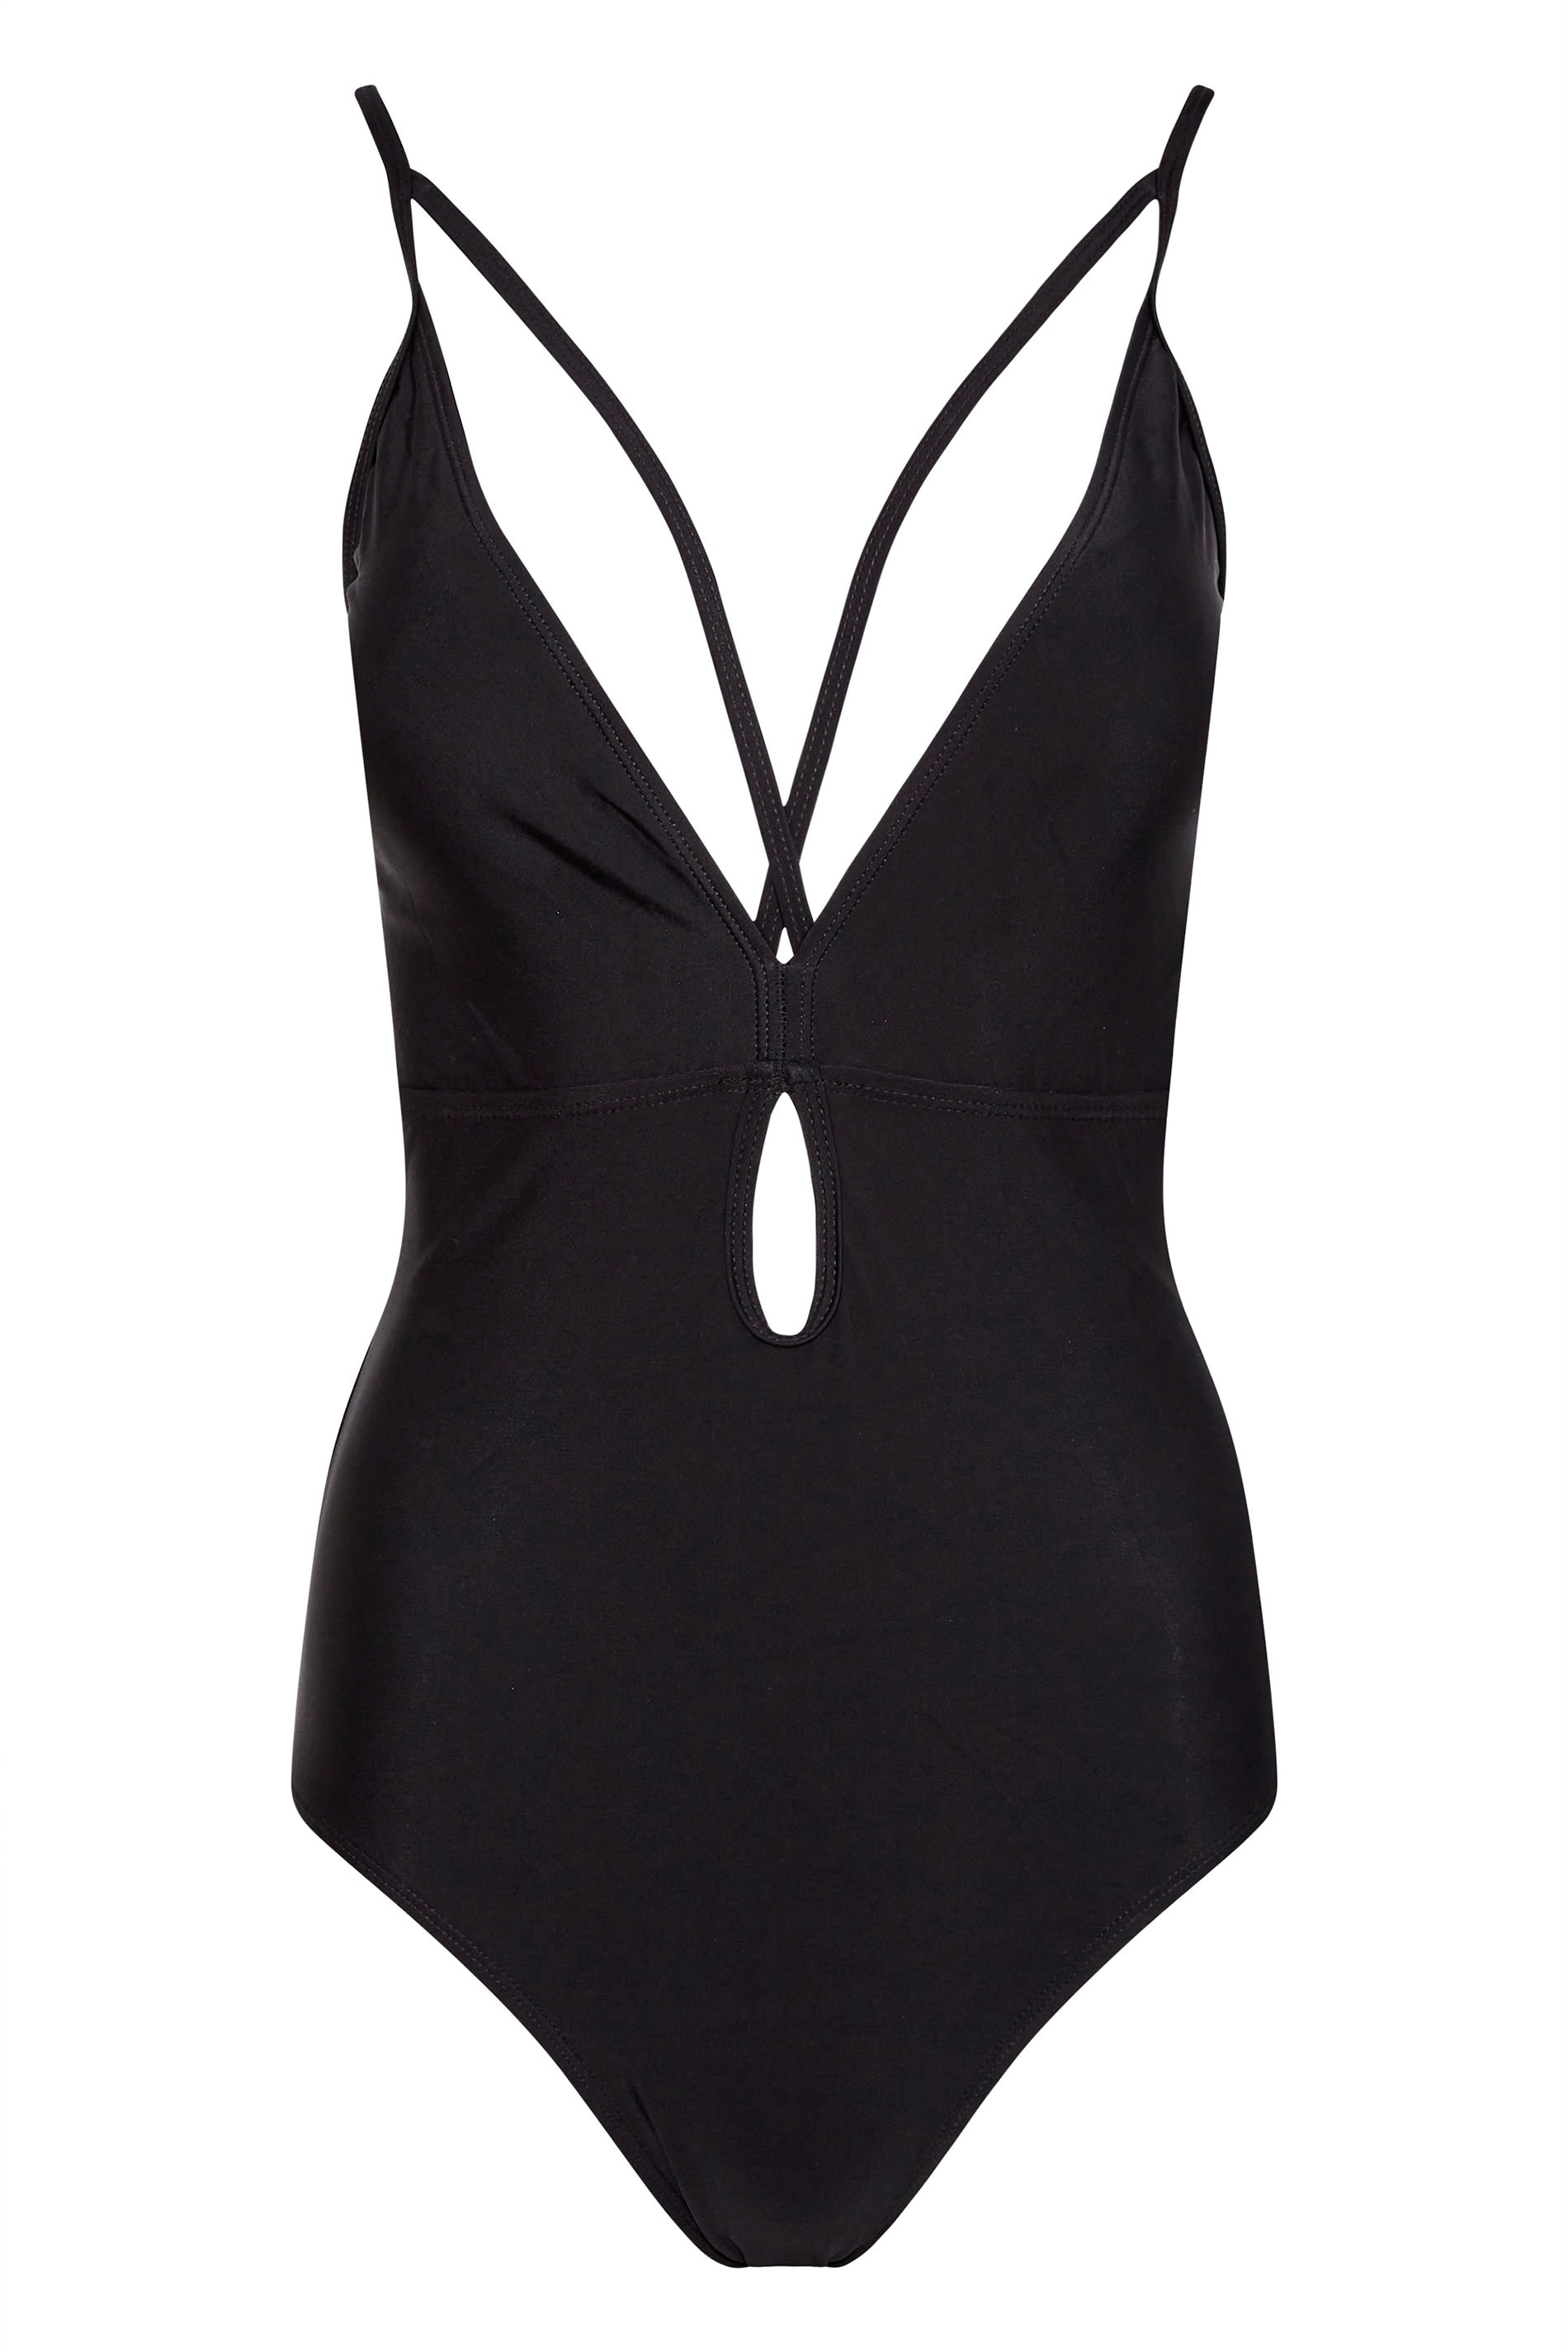 LTS Tall Women's Black Strappy Swimsuit | Long Tall Sally